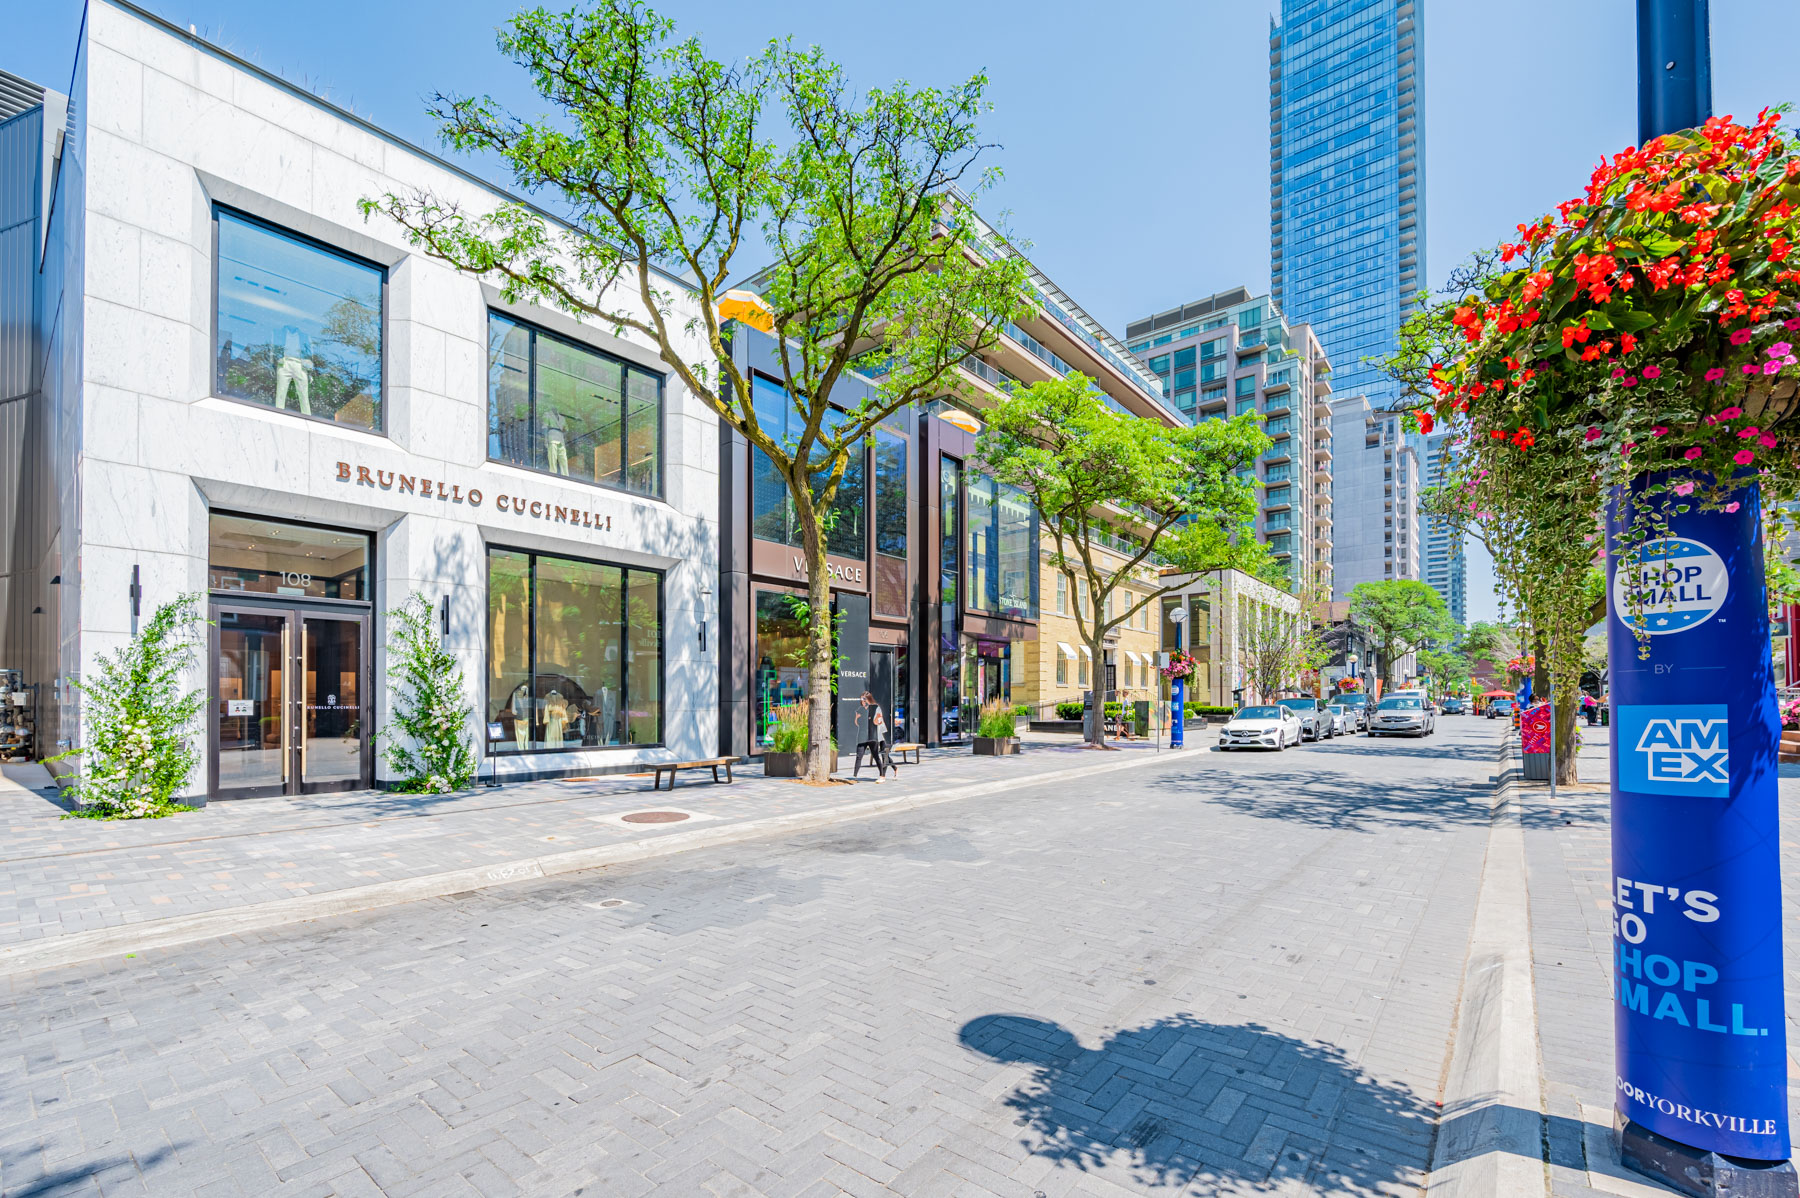 Brunello Cucinelli and Versace flagship storefronts in Yorkville, Toronto.